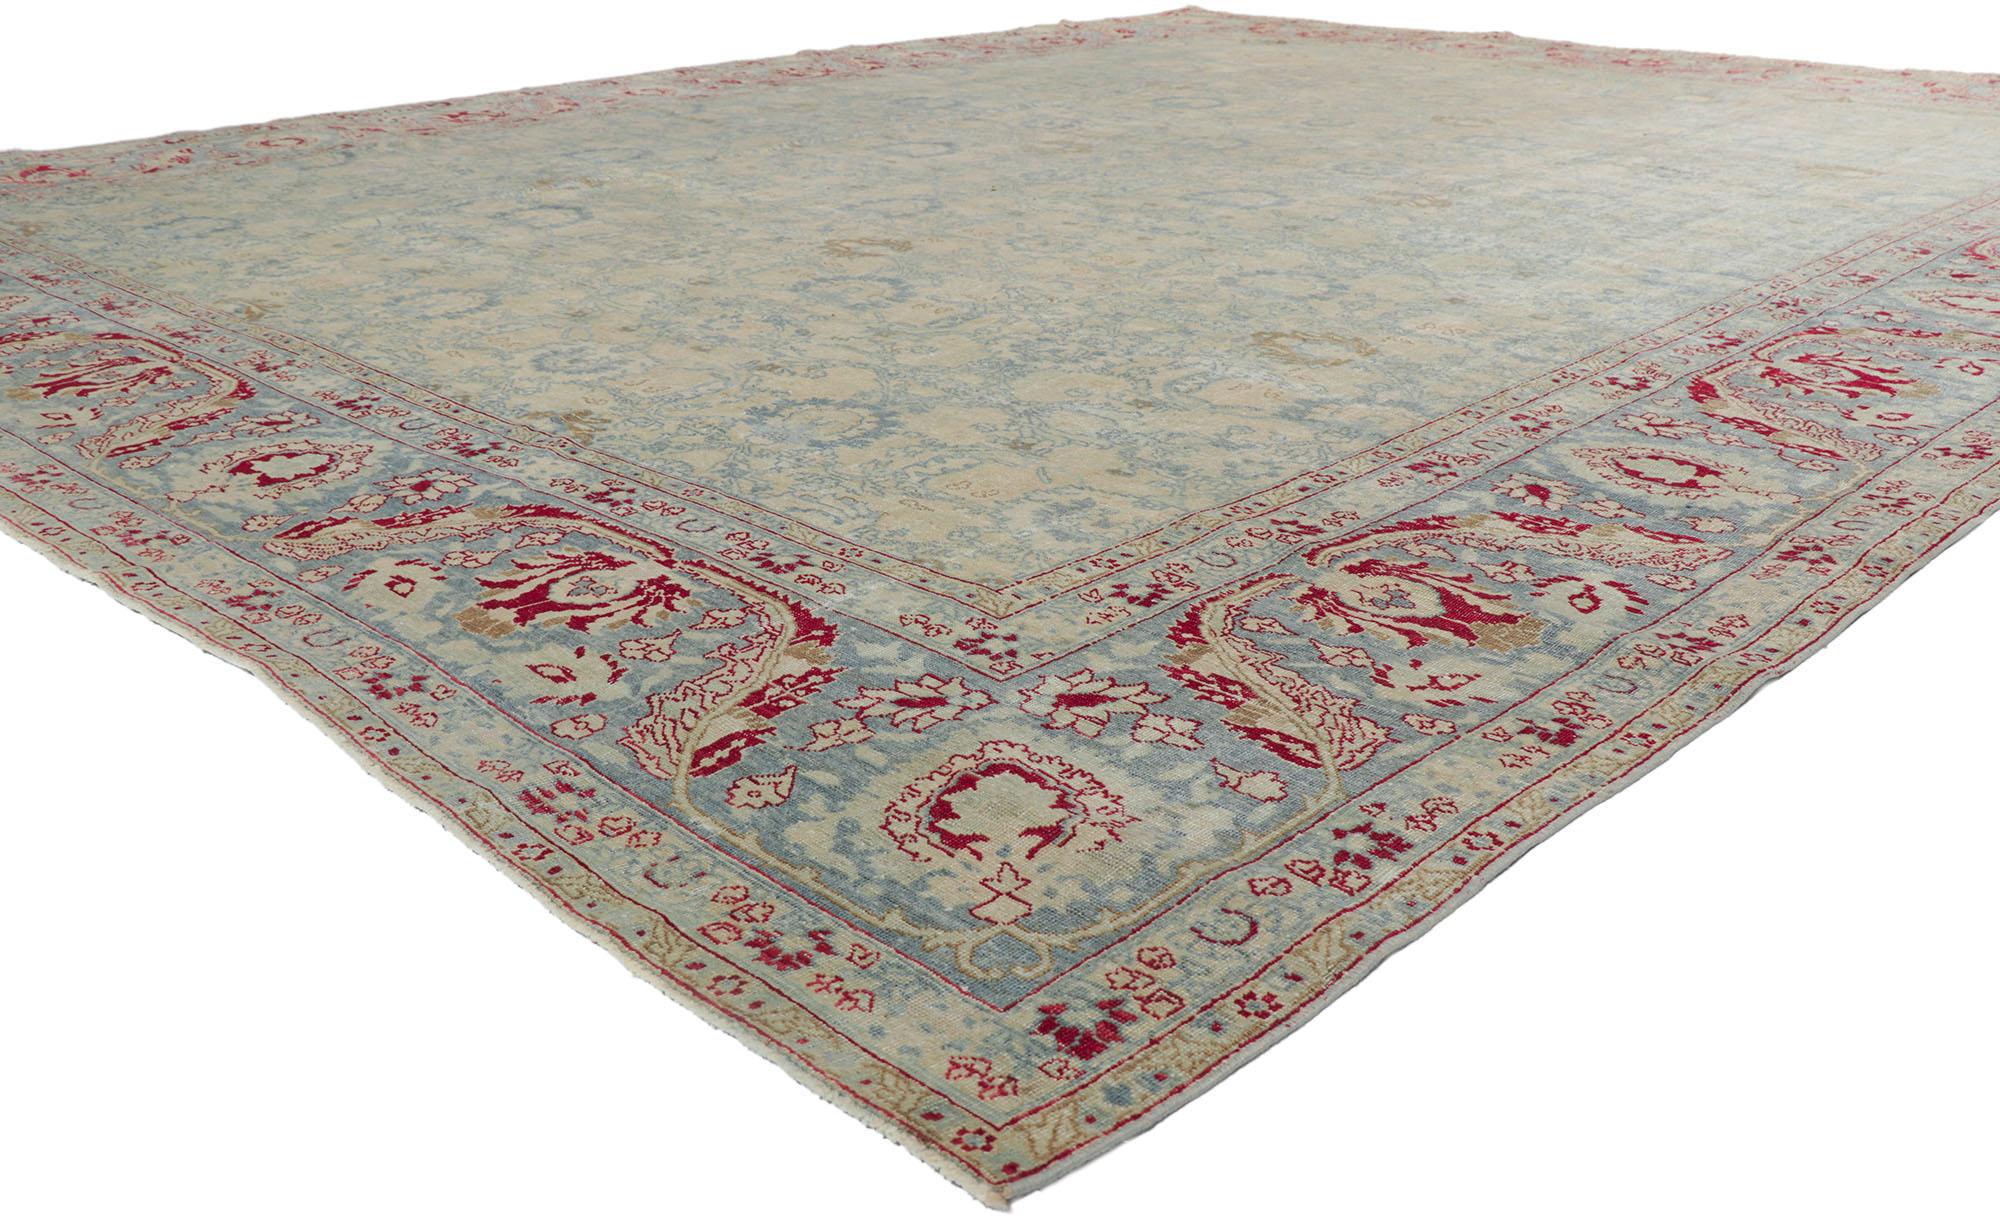 53774 Antique-Worn Persian Tabriz Rug, 11'03 x 14'00.
Experience the epitome of laid-back luxury with a touch of patriotic flair in this exquisite hand-knotted wool distressed antique Persian Tabriz rug. Prepare to be captivated by its intricate